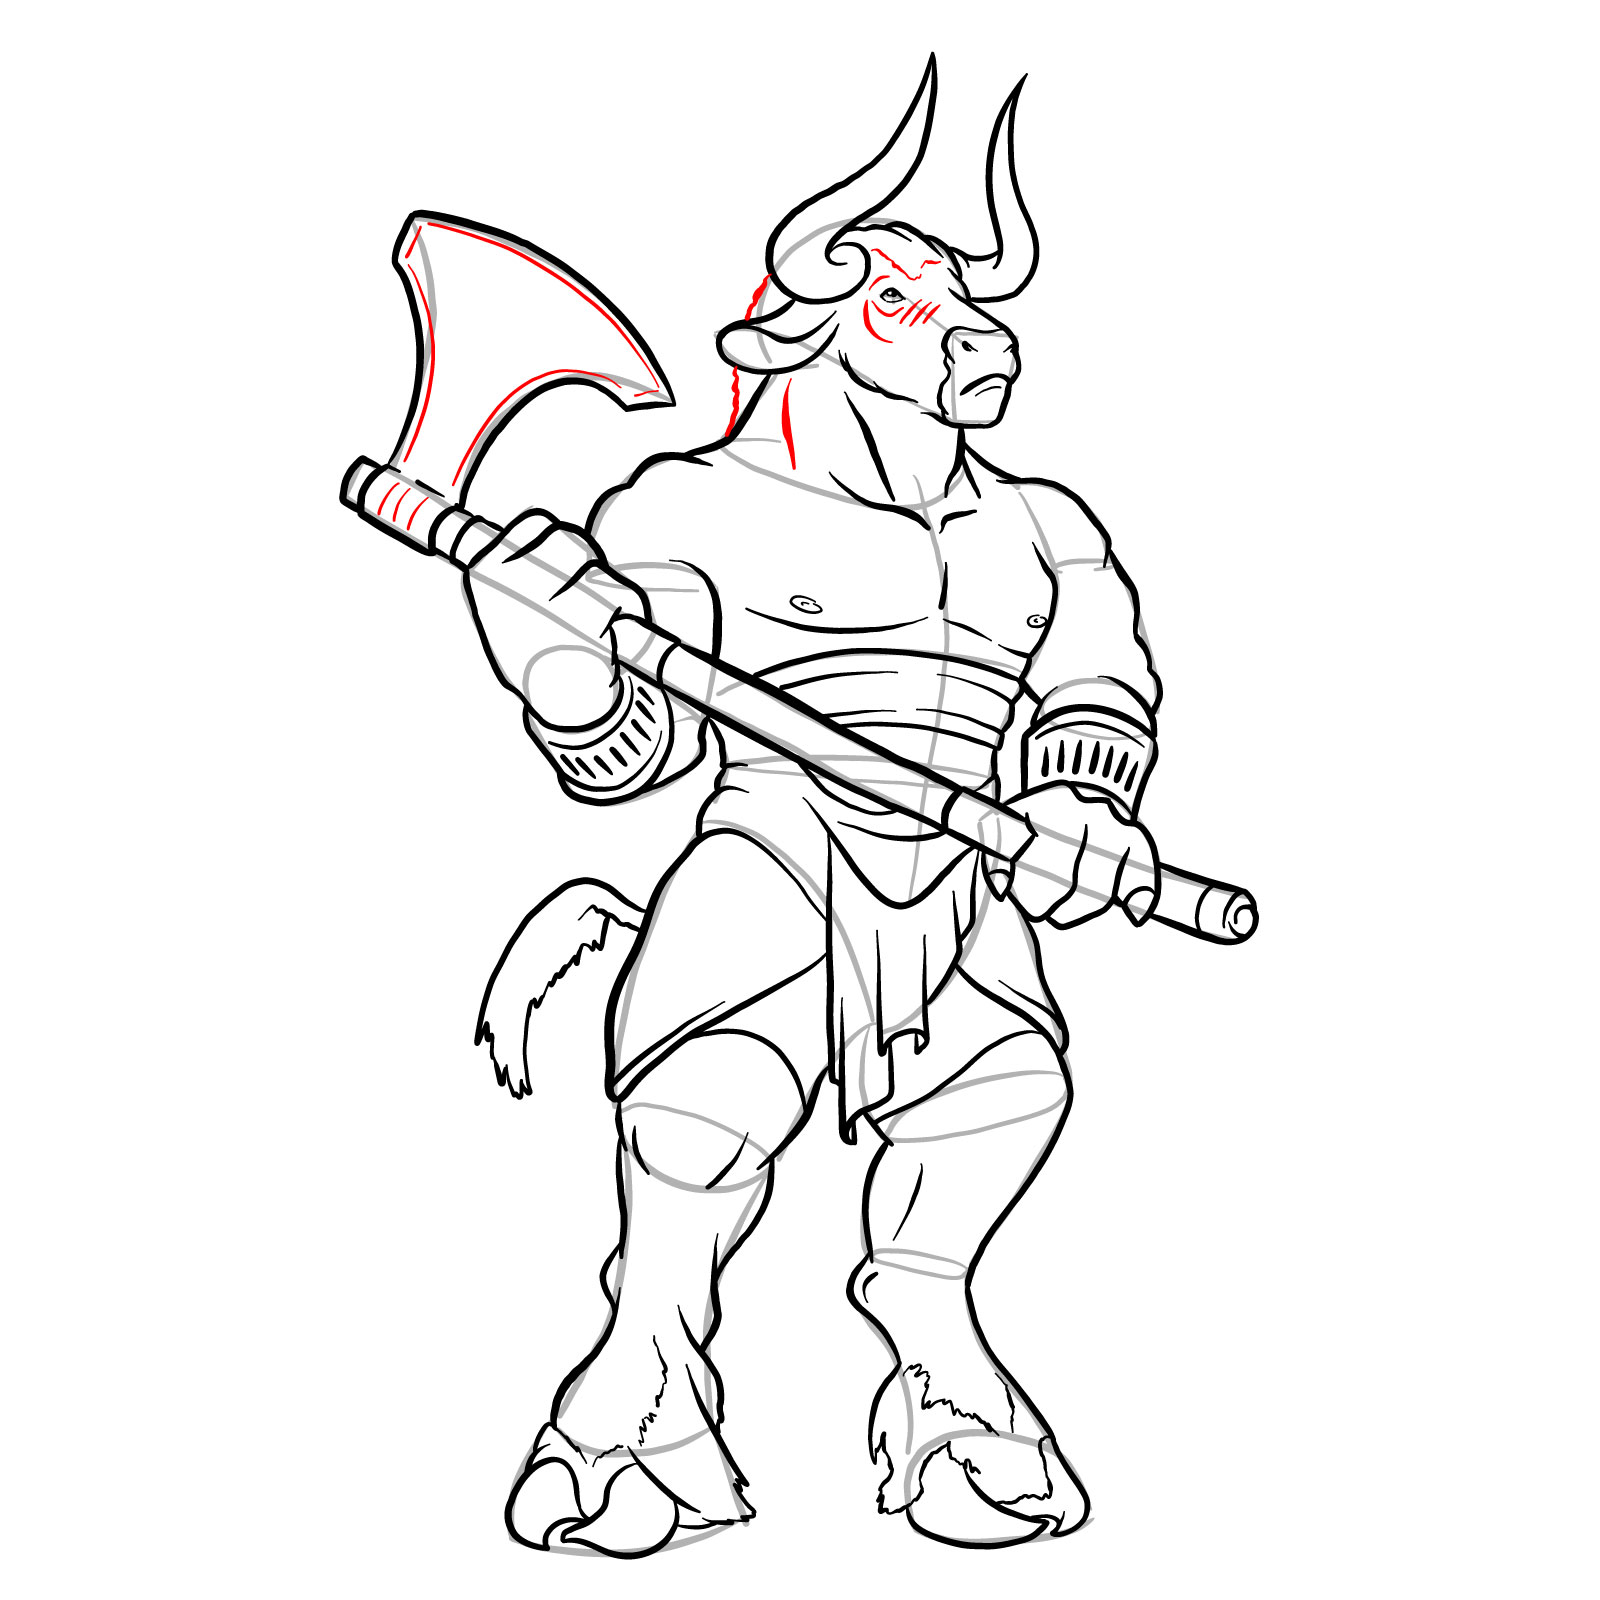 How to draw a Minotaur Sketchok easy drawing guides